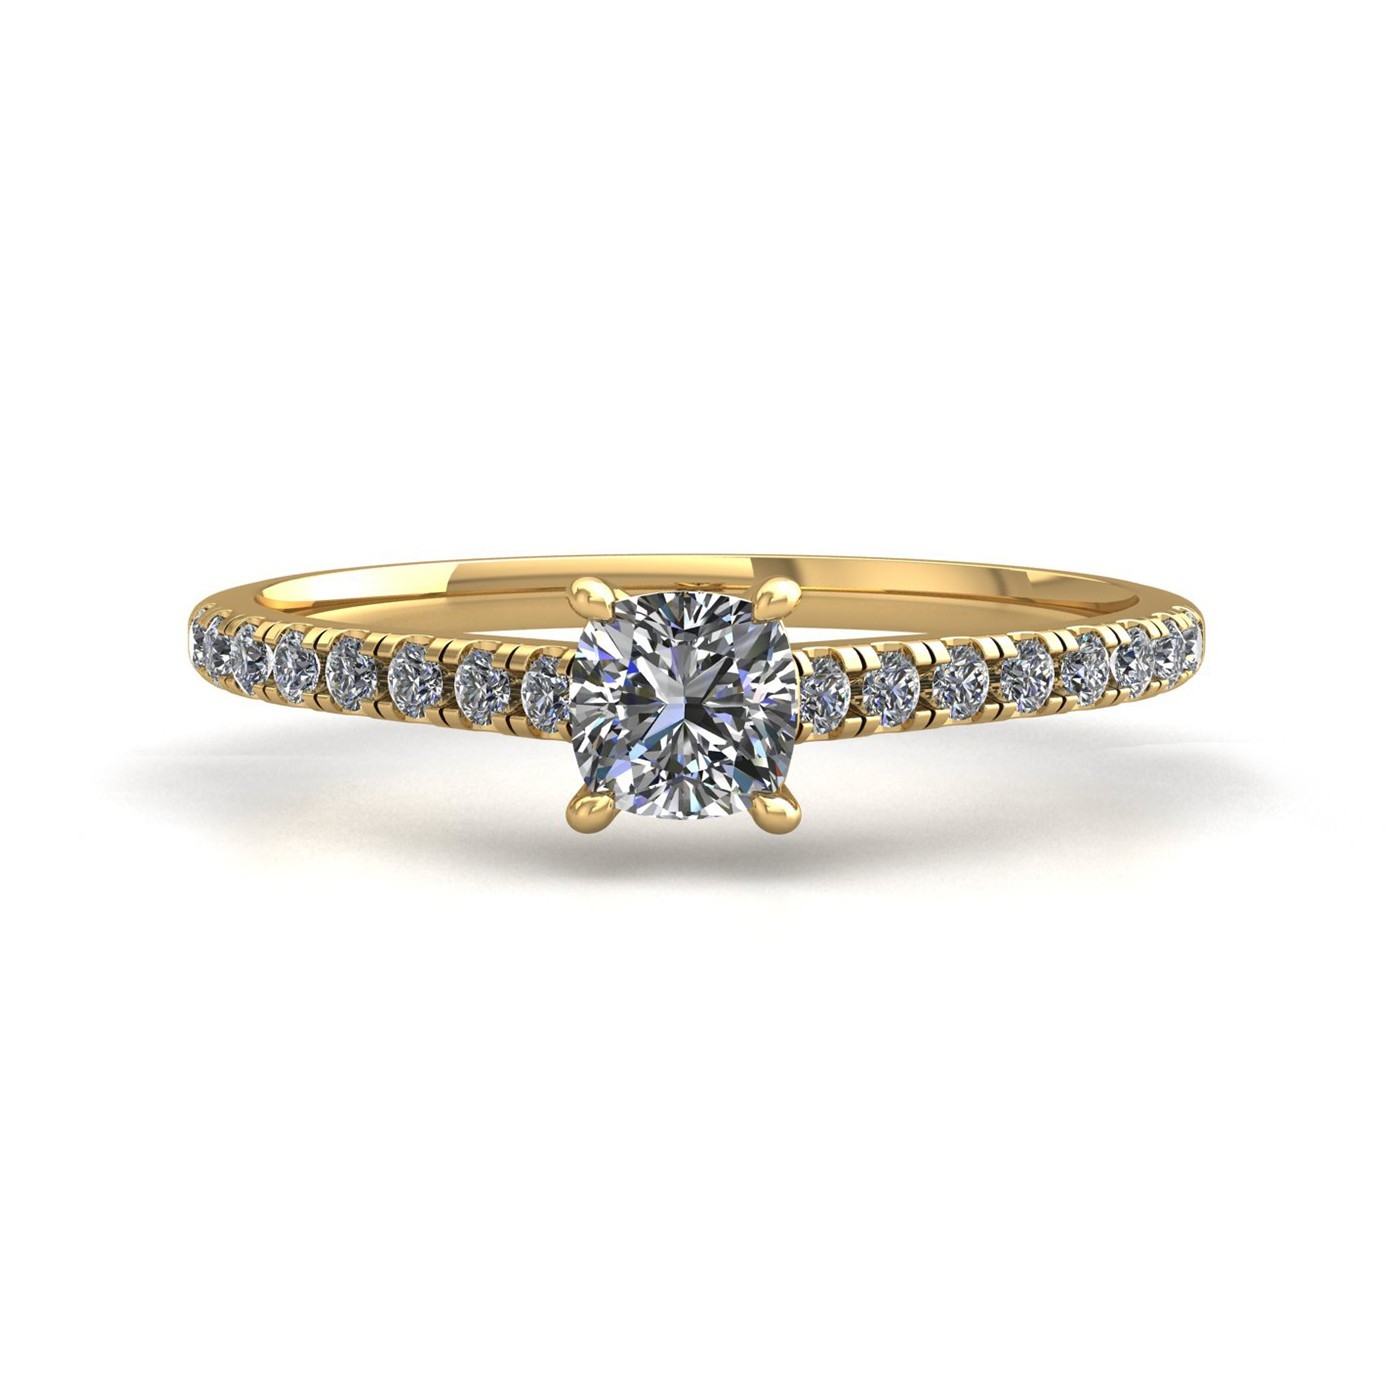 18k yellow gold  0,50 ct 4 prongs cushion cut diamond engagement ring with whisper thin pavÉ set band Photos & images